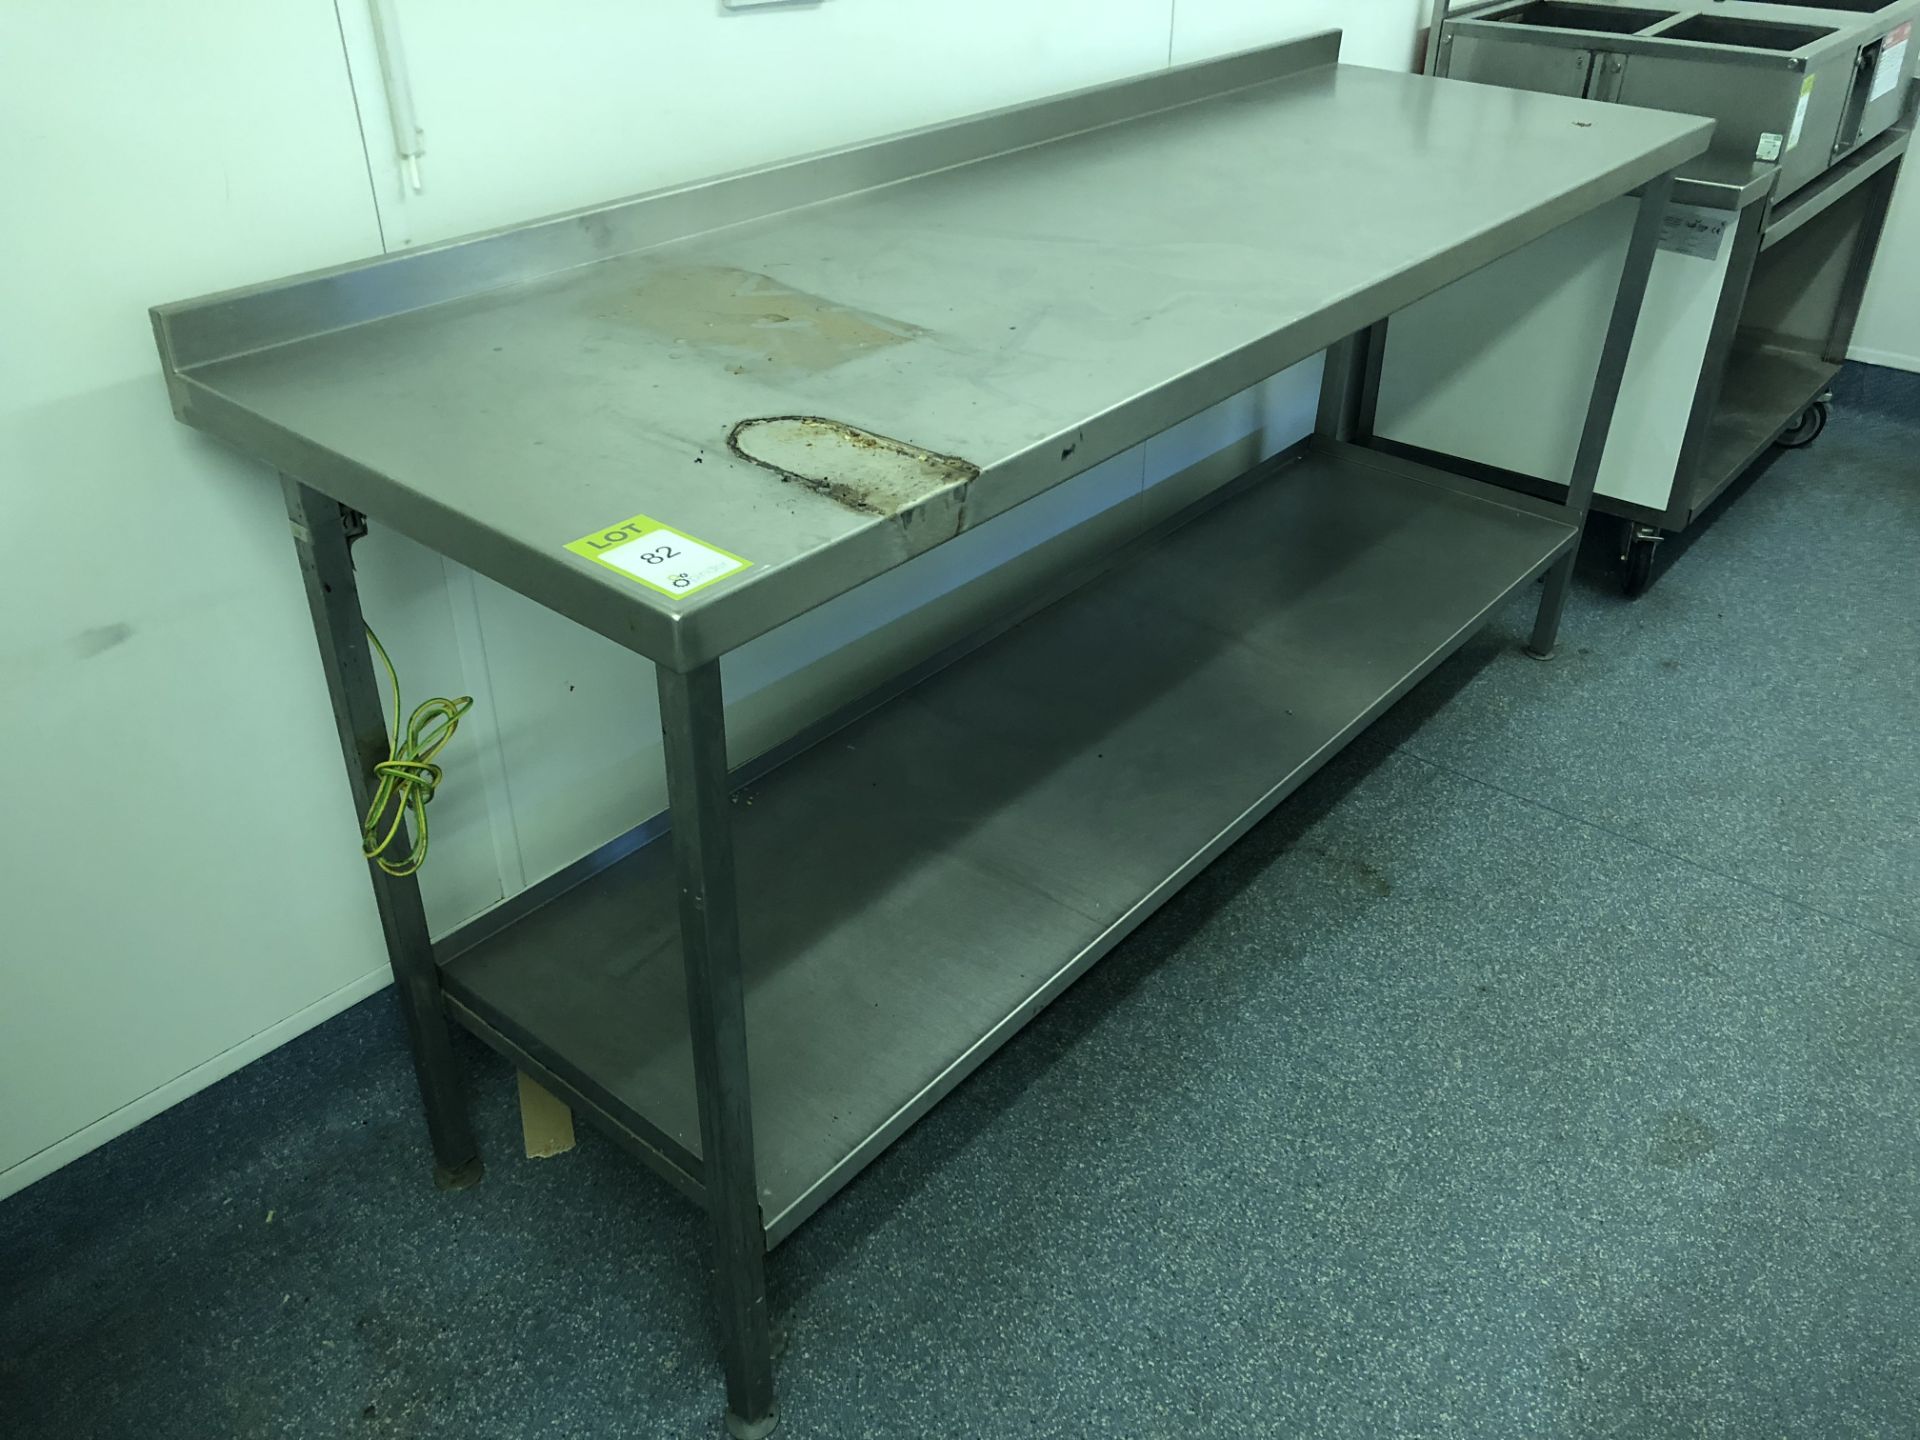 Stainless steel Preparation Table, 1900mm x 600mm, with lip and shelf under (located in Snack - Image 2 of 2